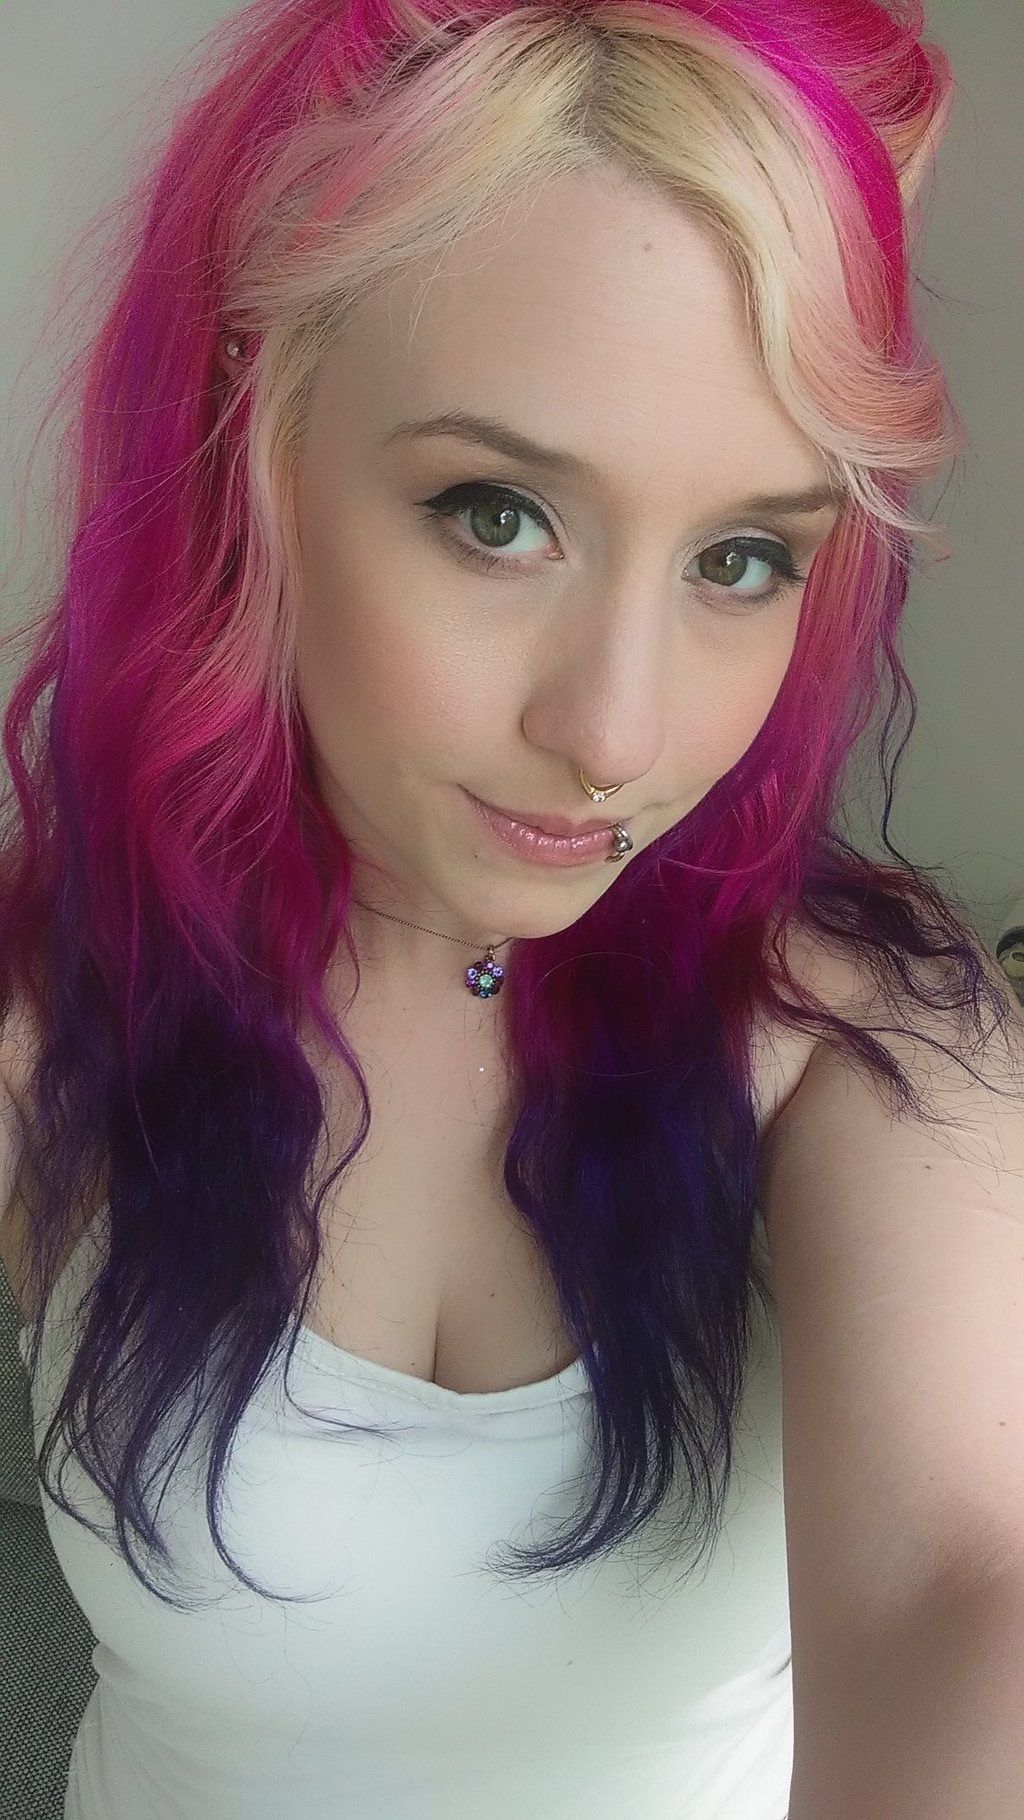 Proxy Paige with pink hair and a white shirt taking a selfie.